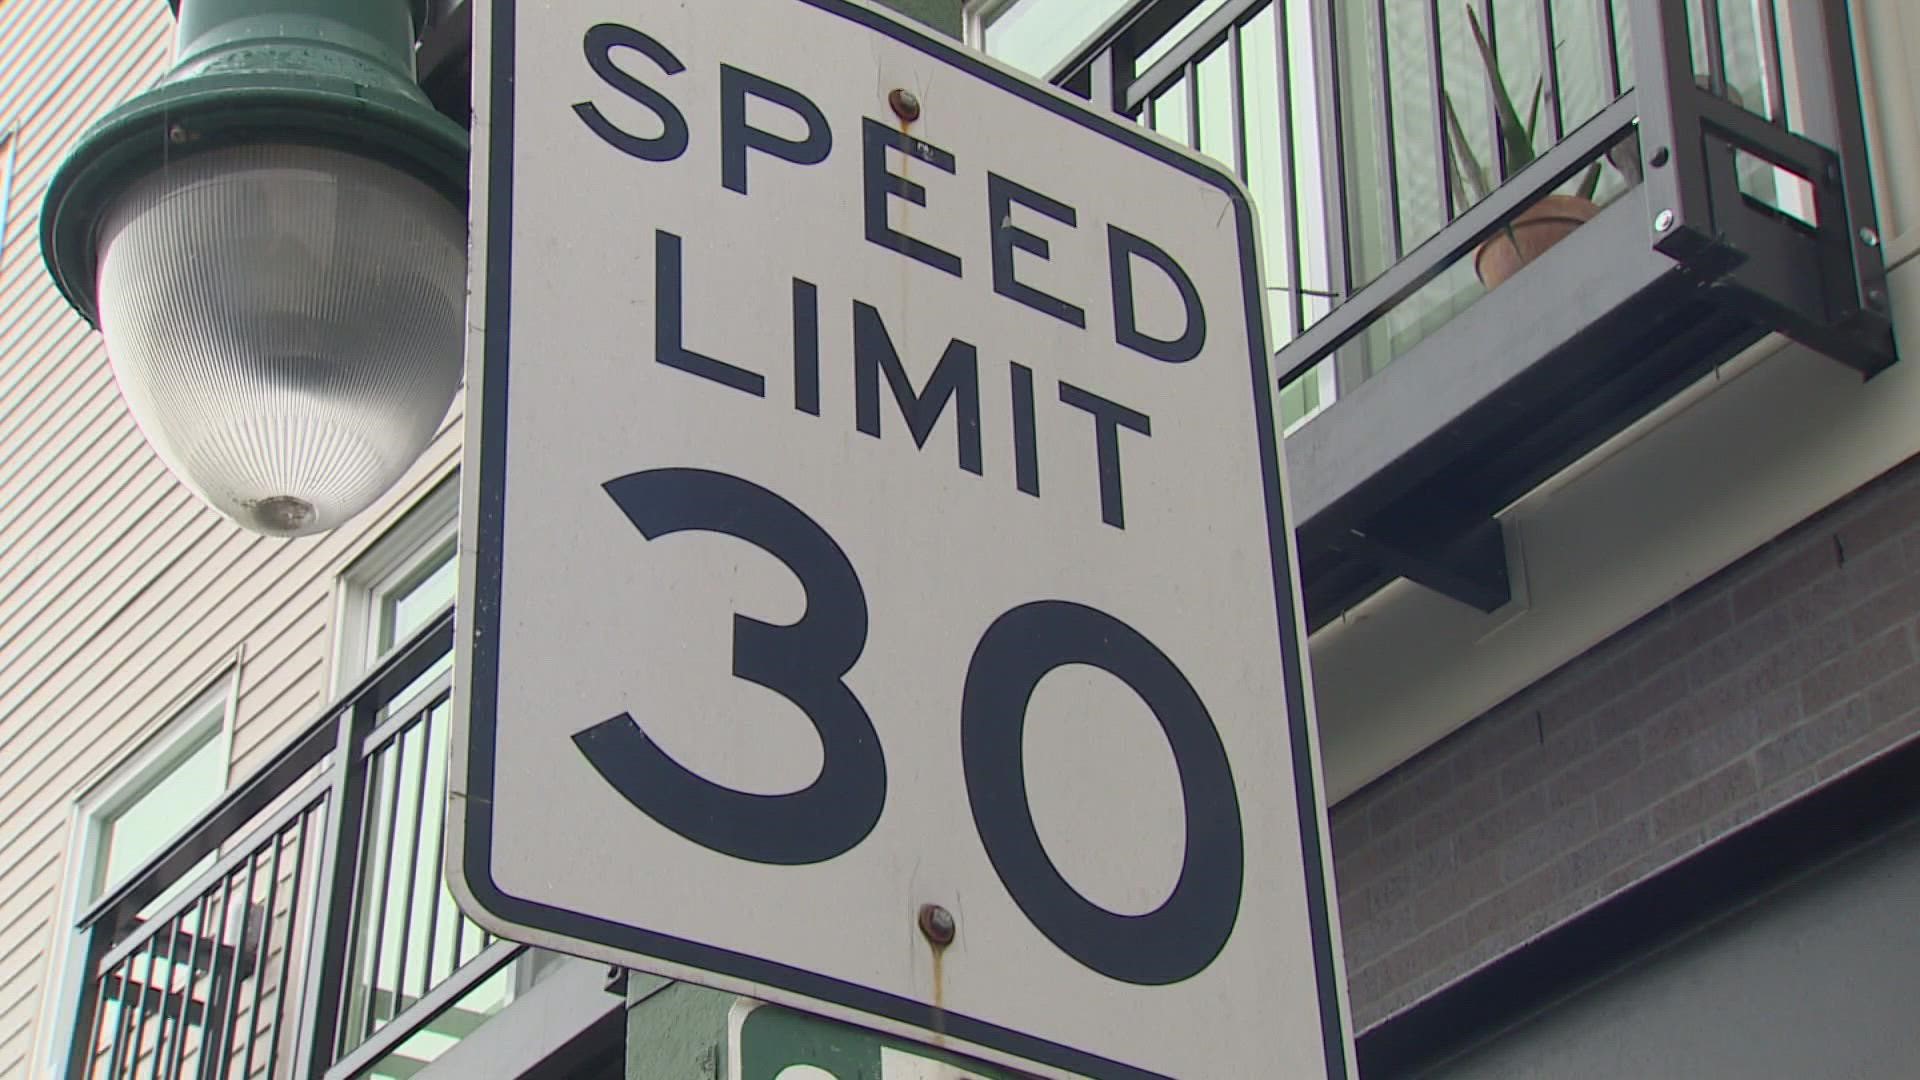 Tacoma is looking to lower the speed limit in certain parts of the city in order to address traffic fatalities and severe injuries in car crashes.